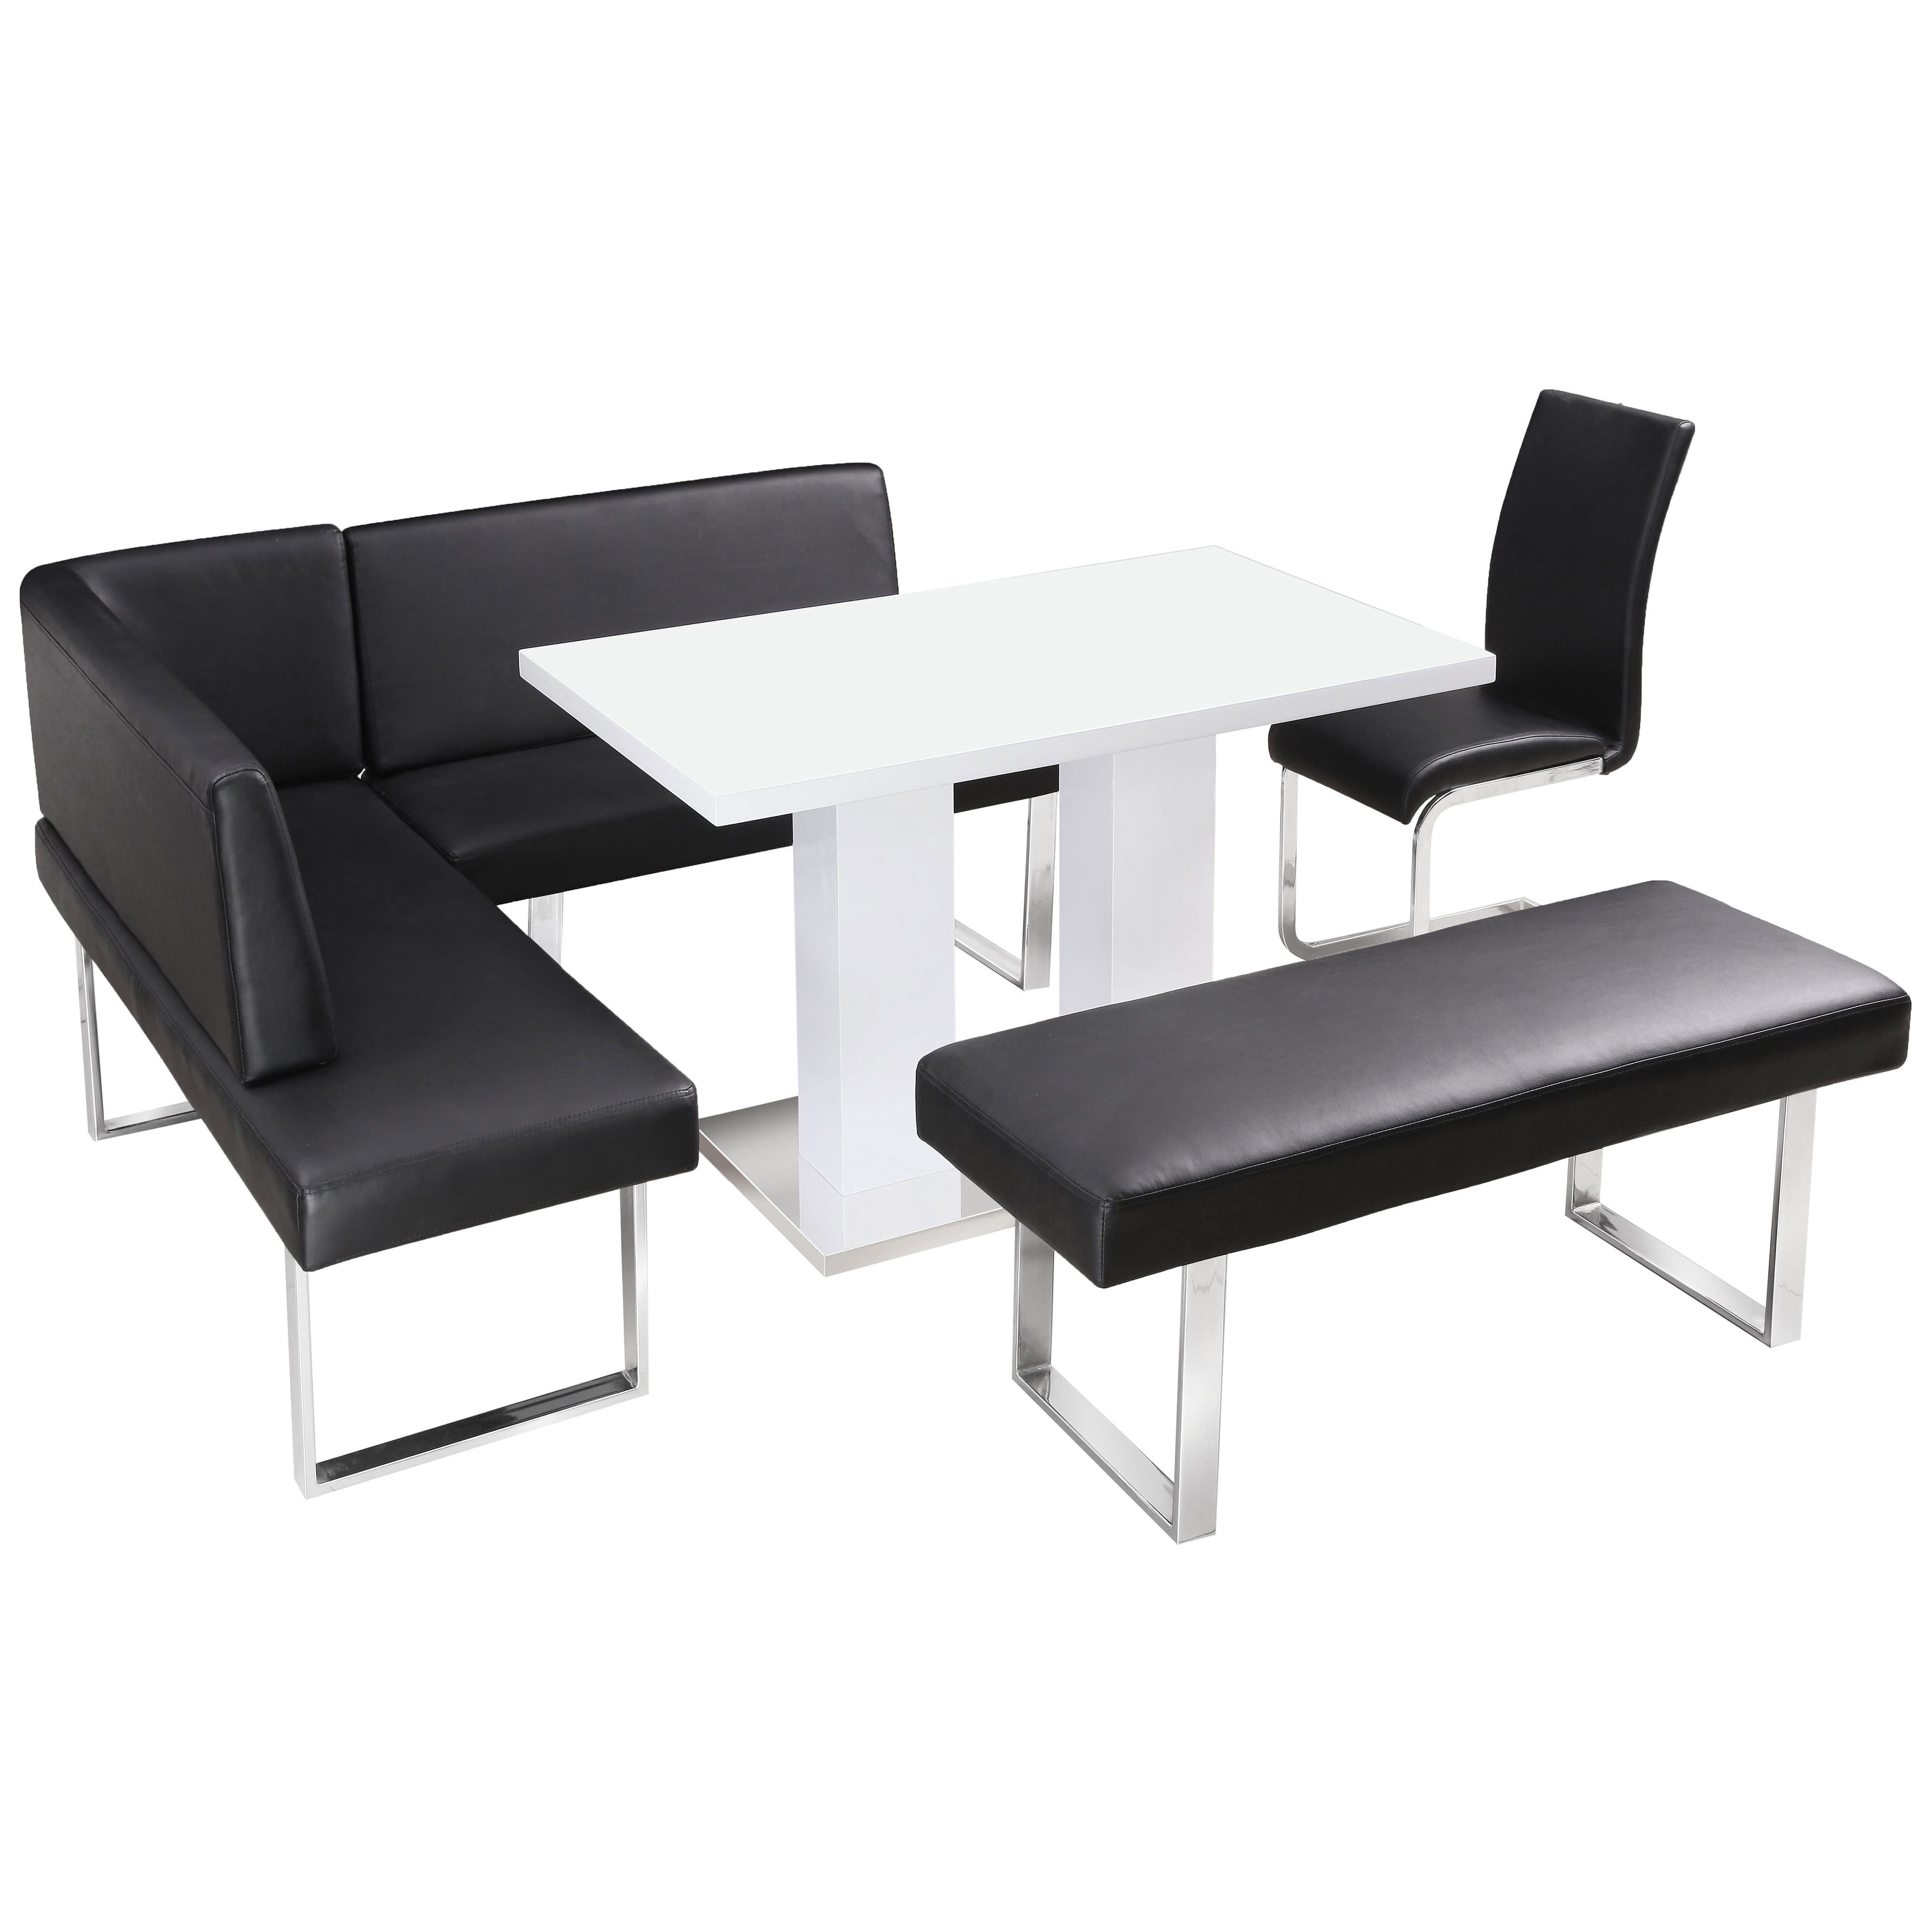 Black High Gloss Dining Tables Intended For Latest High Gloss Dining Table And Chair Set With Corner Bench & 1 Seat (Photo 22 of 25)